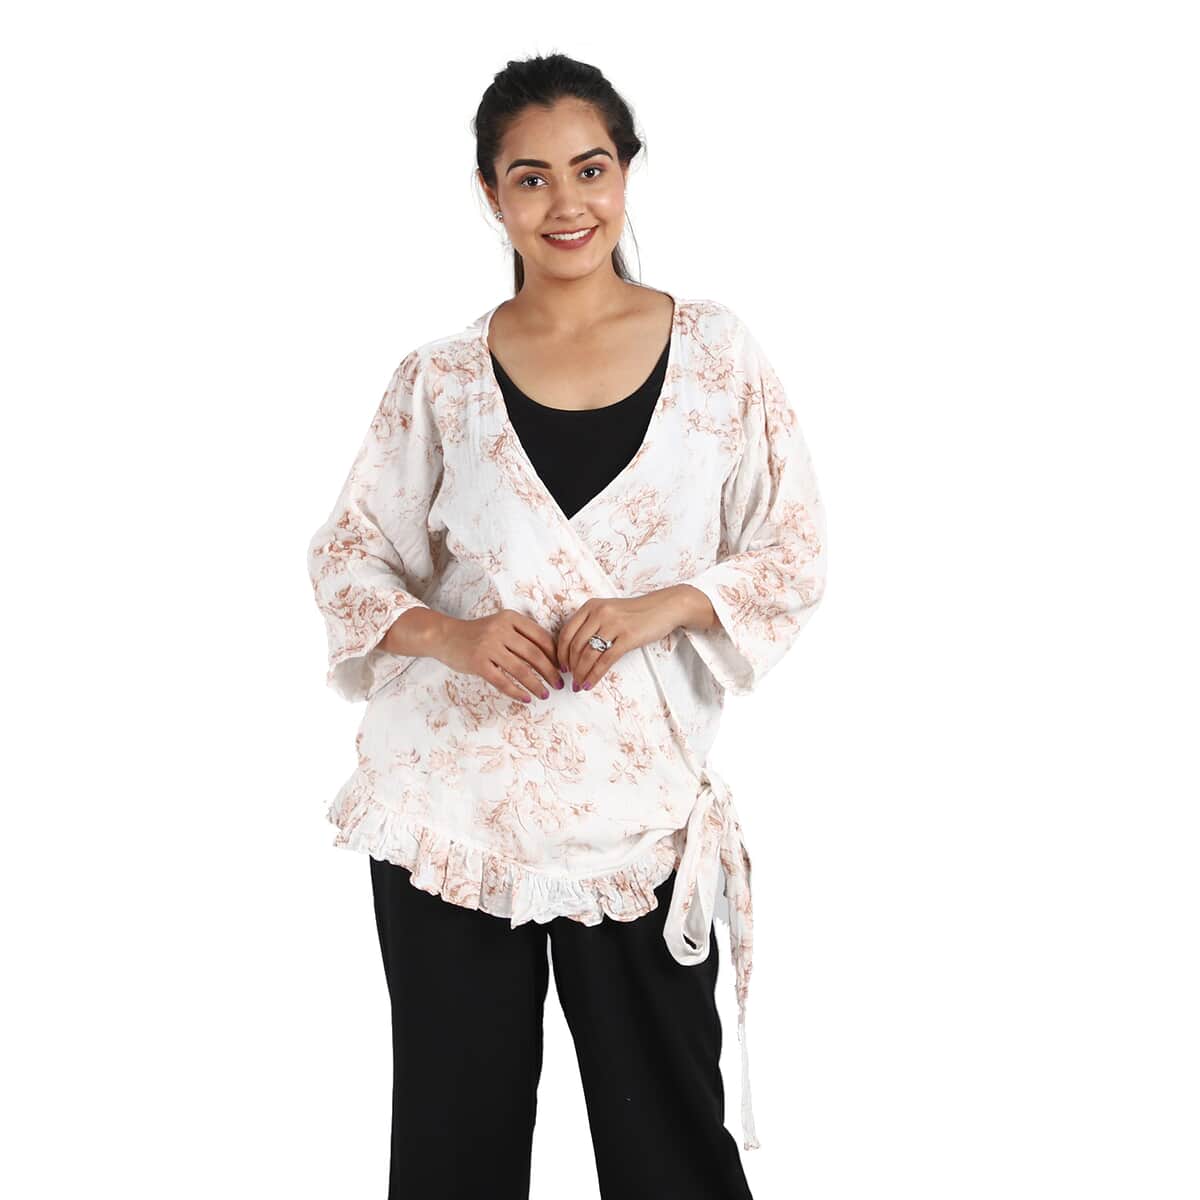 JOVIE Pink with Floral pattern Cotton Gauze Wrap Blouse with Frill Trim - One Size Missy image number 0